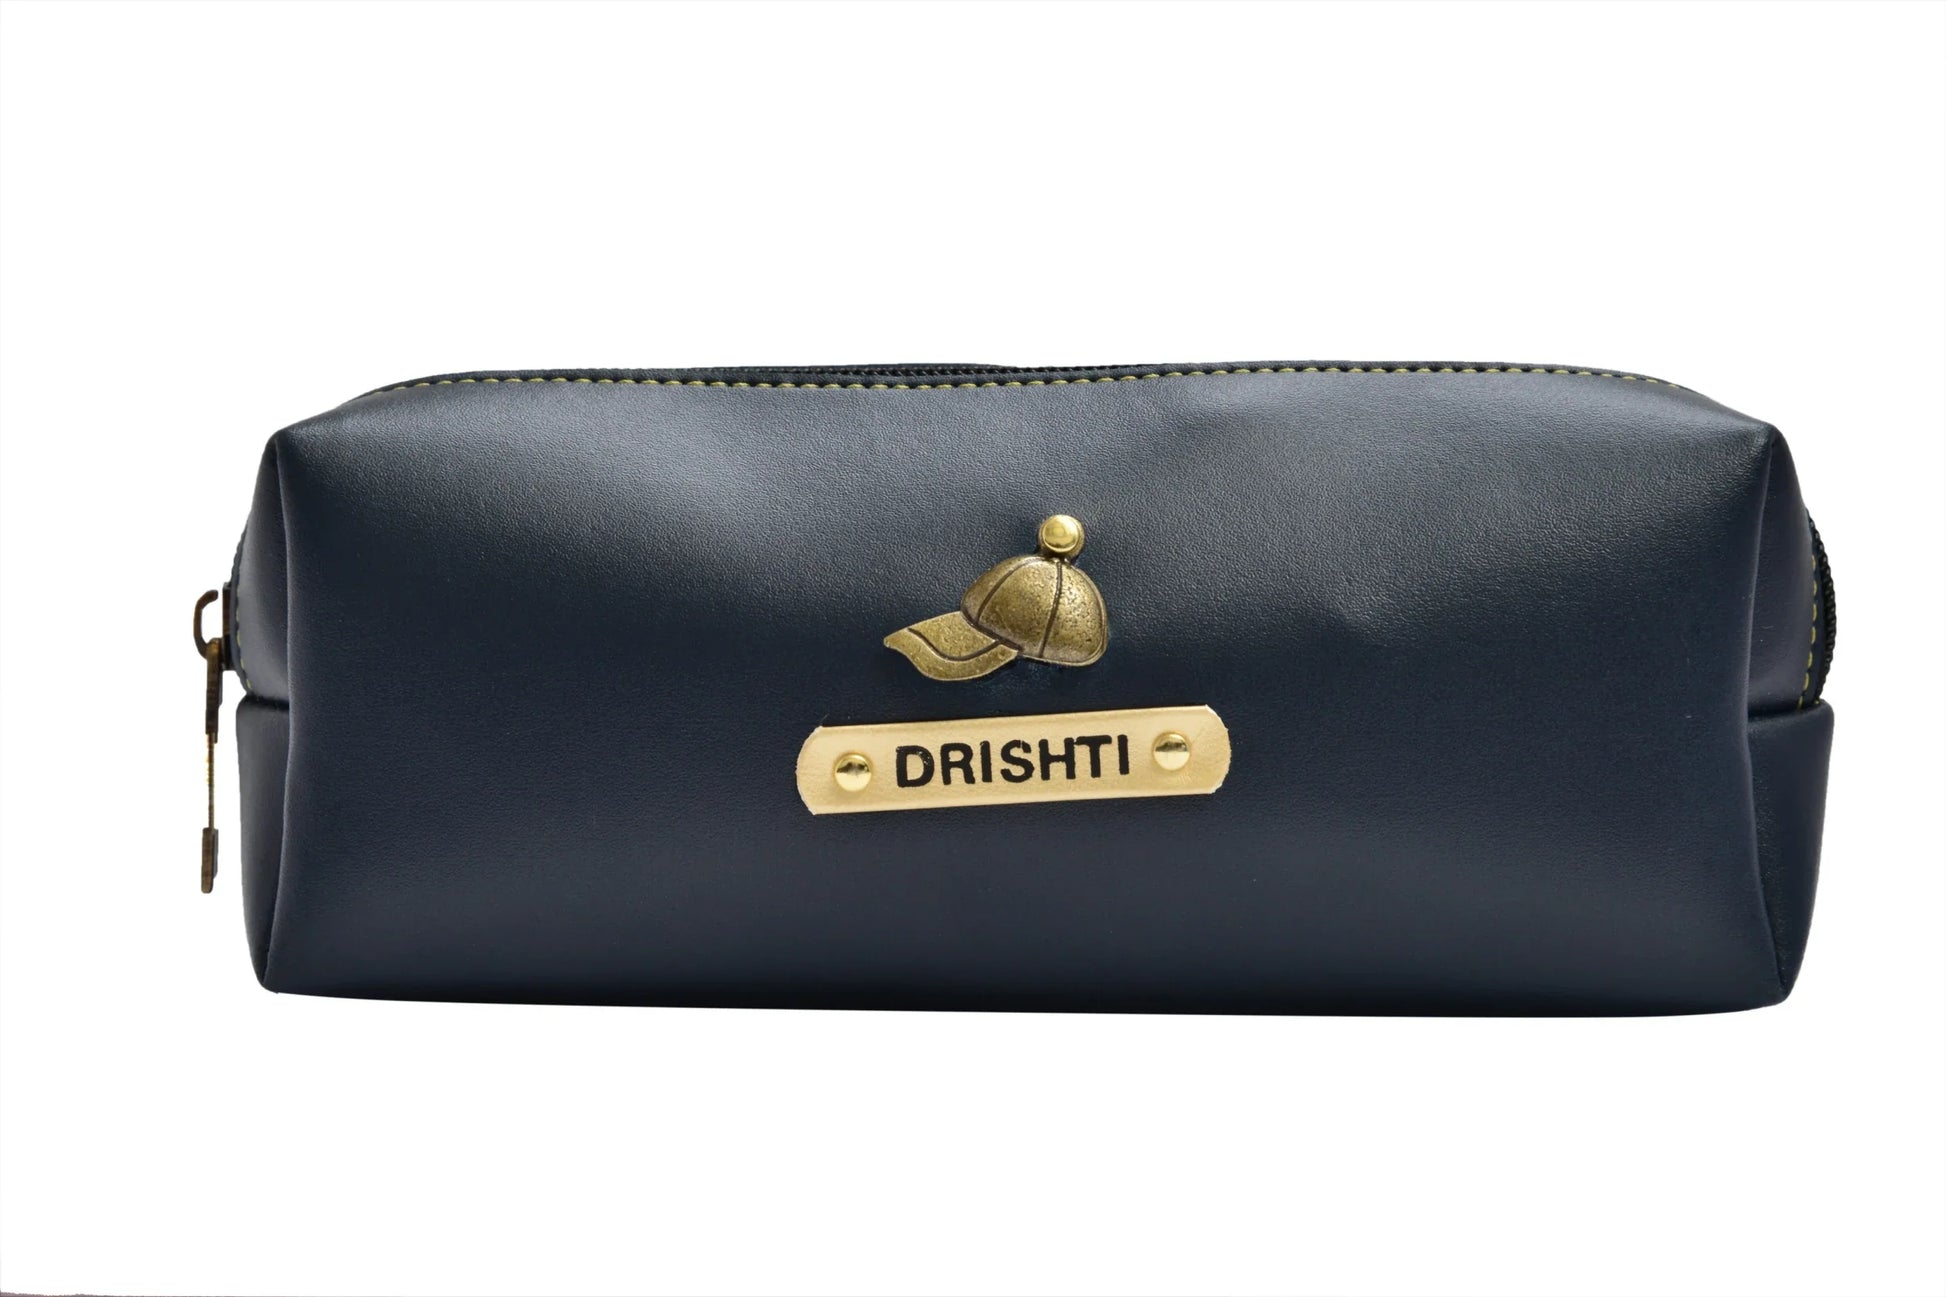 "Perfectly Sized: Our pencil pouch offers ample space for your writing instruments without being too bulky, fitting seamlessly into your bag or backpack."